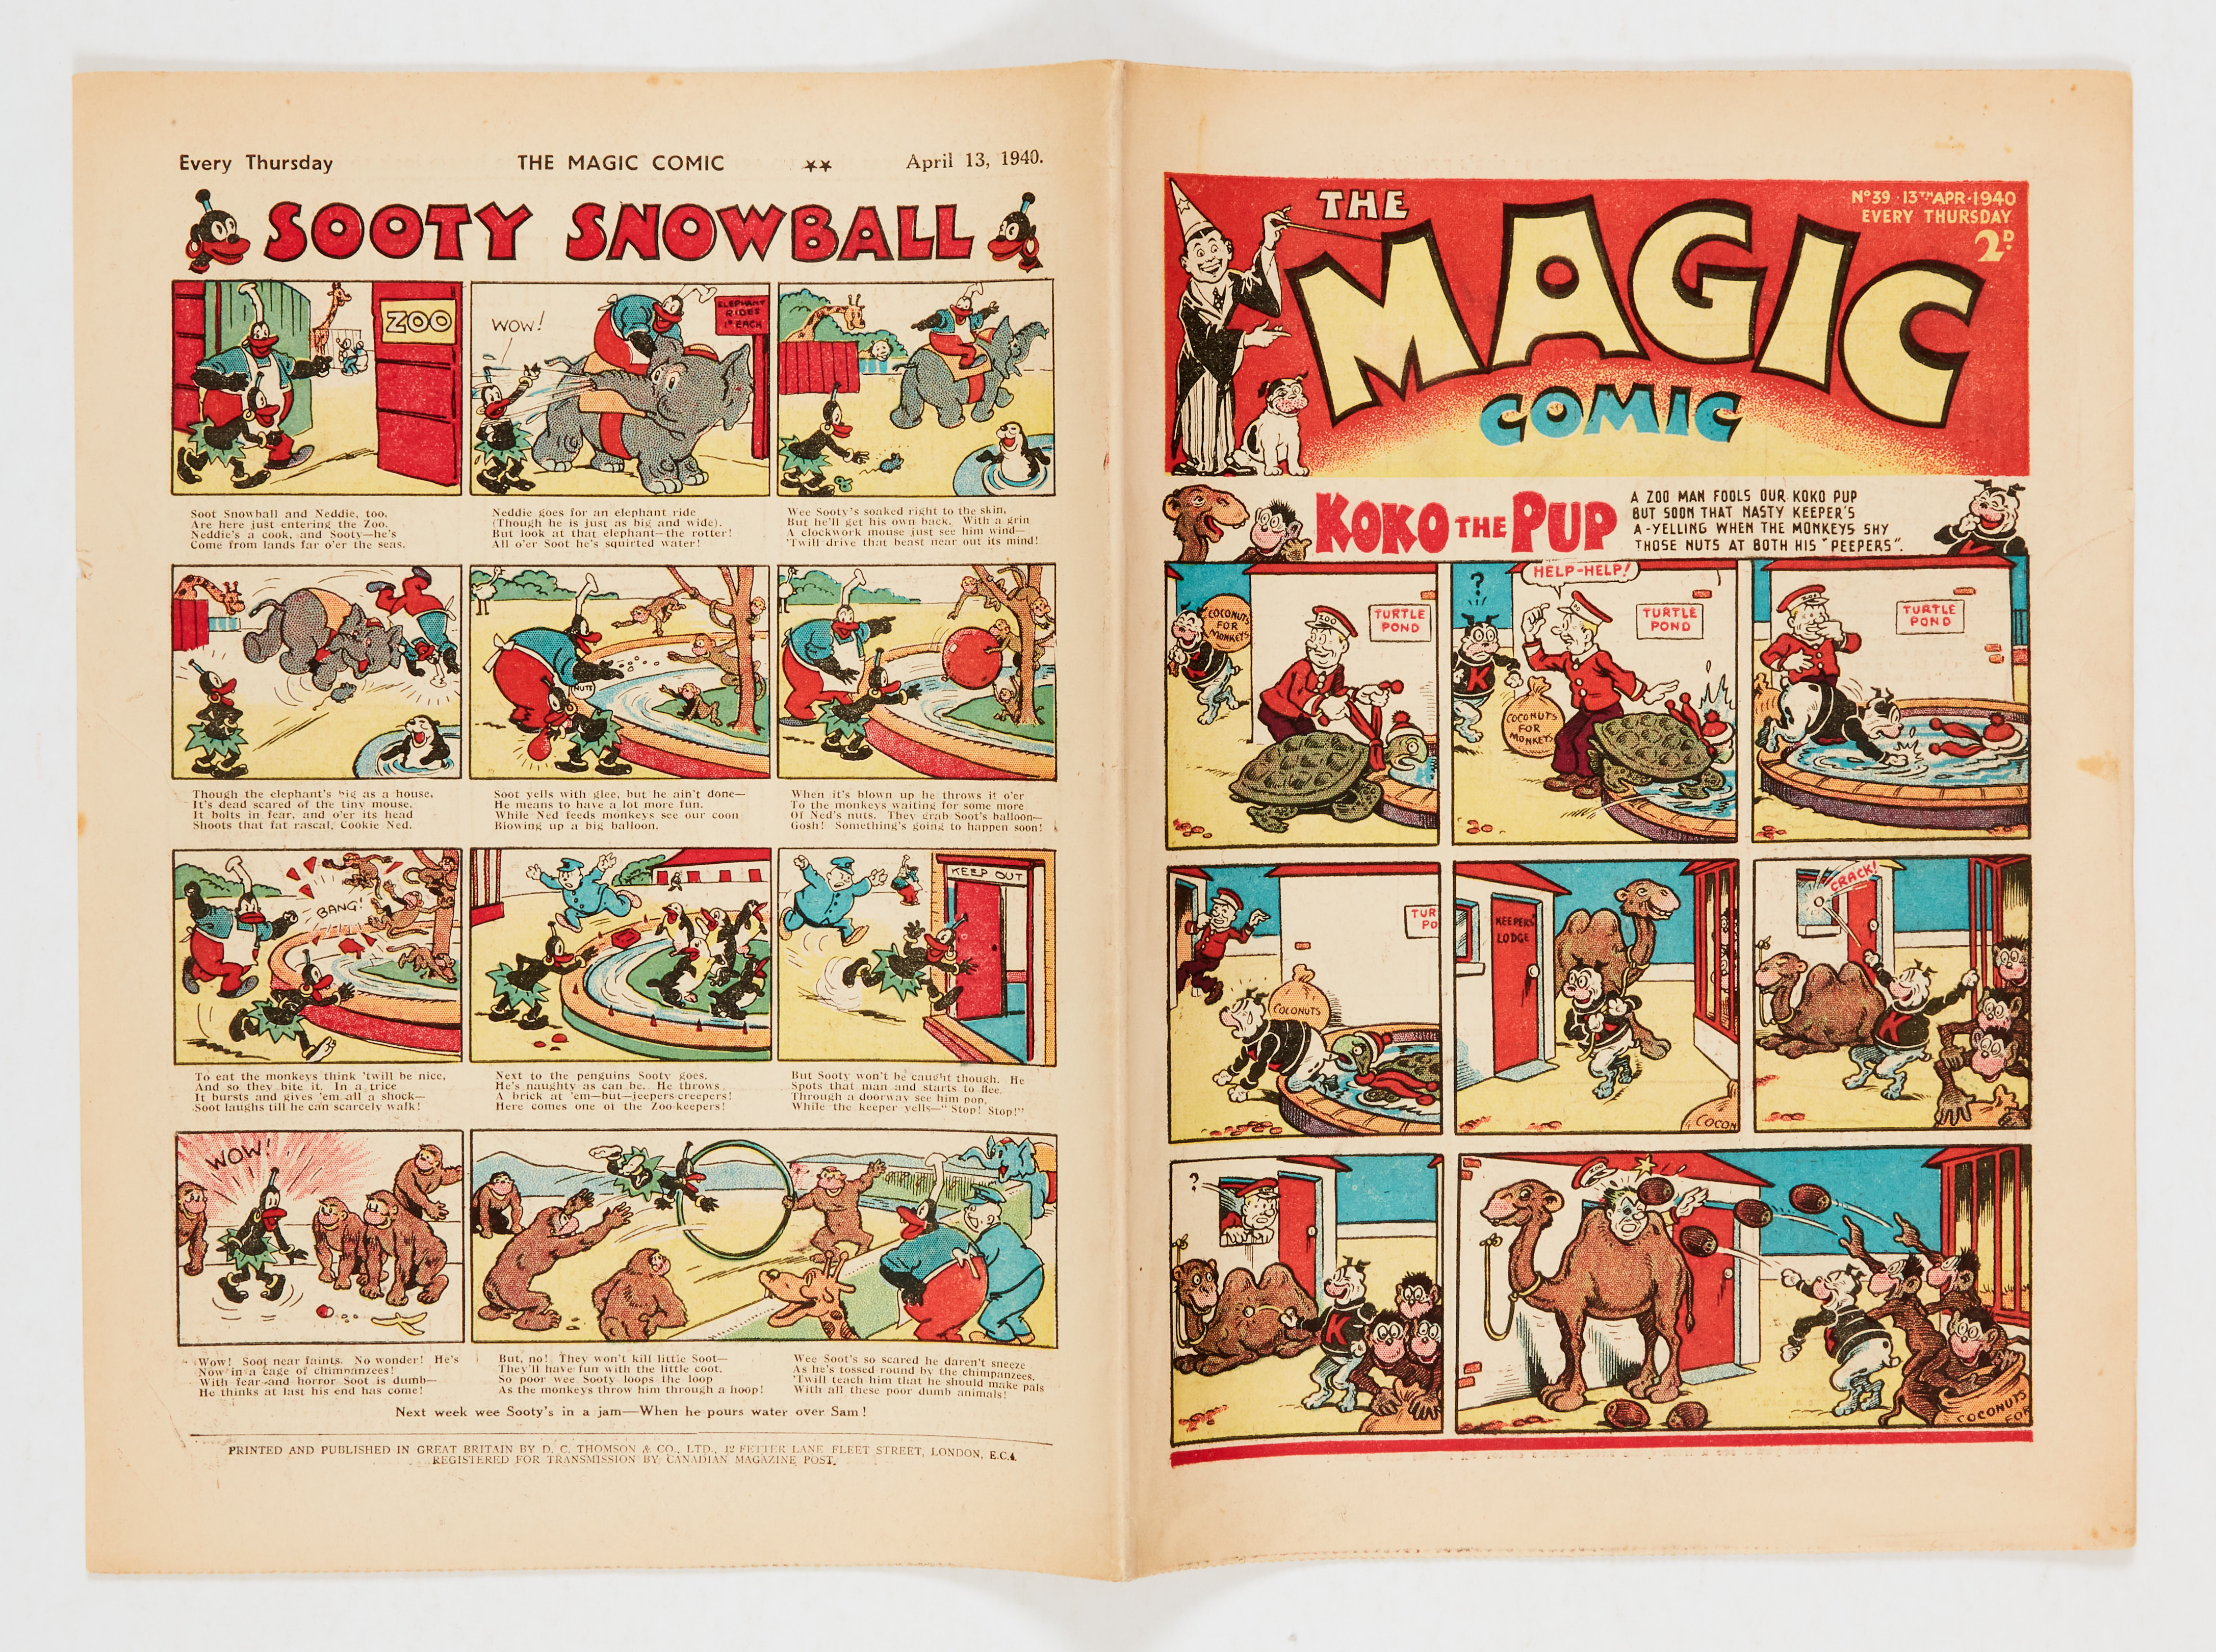 Magic Comic No 39 (1940) with Koko the Pup by E.H. Banger, Peter the Piper by Dudley Watkins. Bright